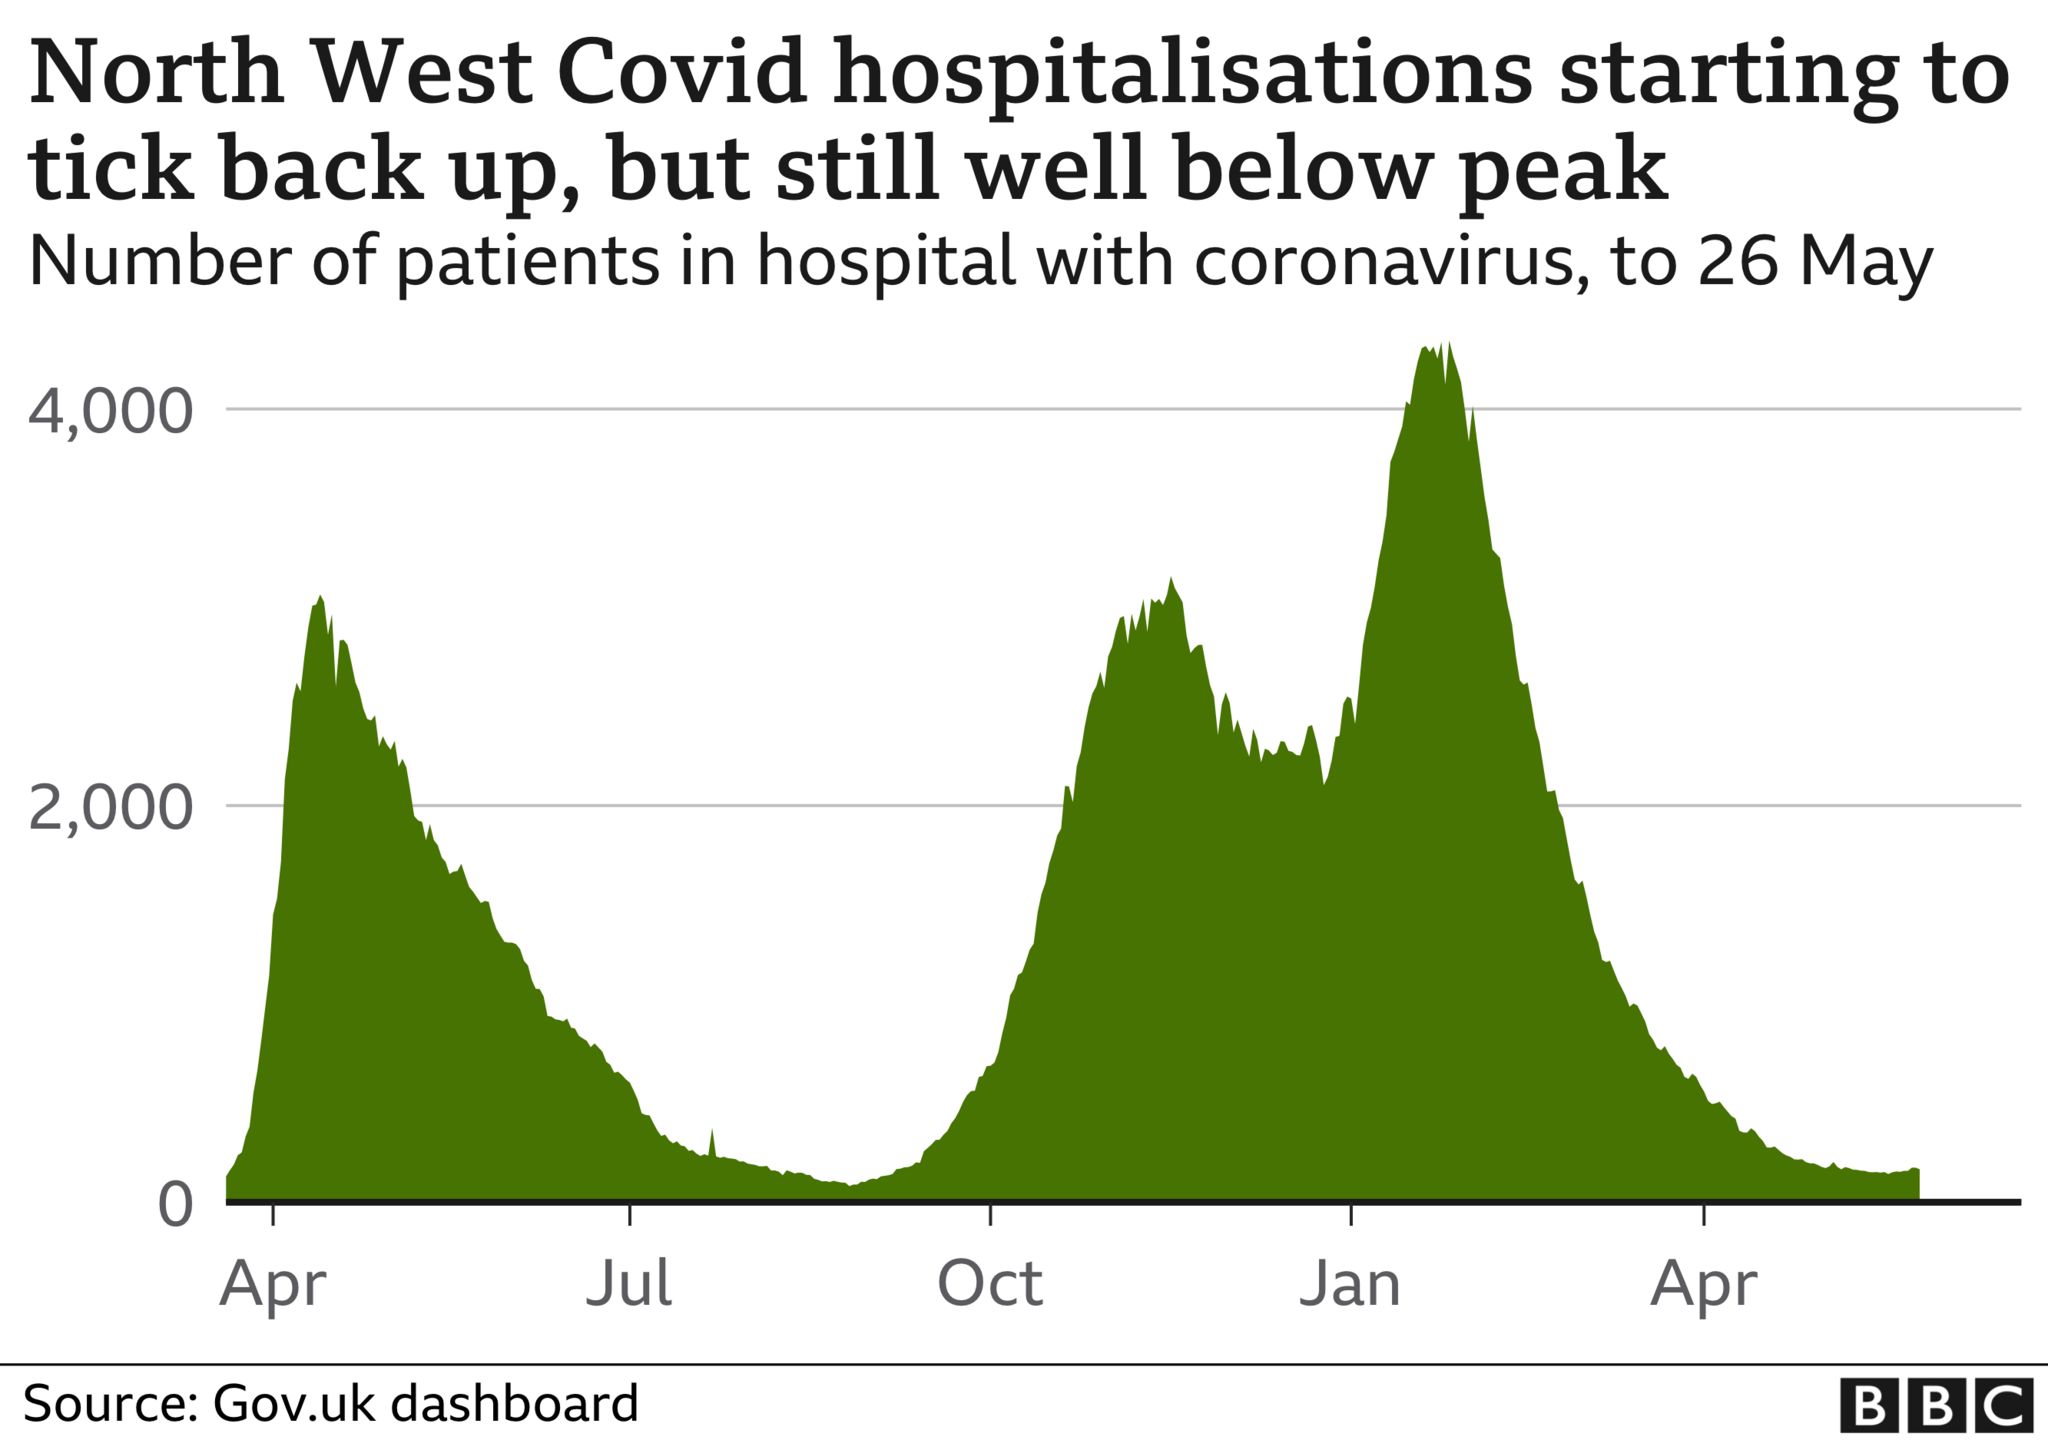 north west: hospital admissions starting to tick back up but are still well below peak